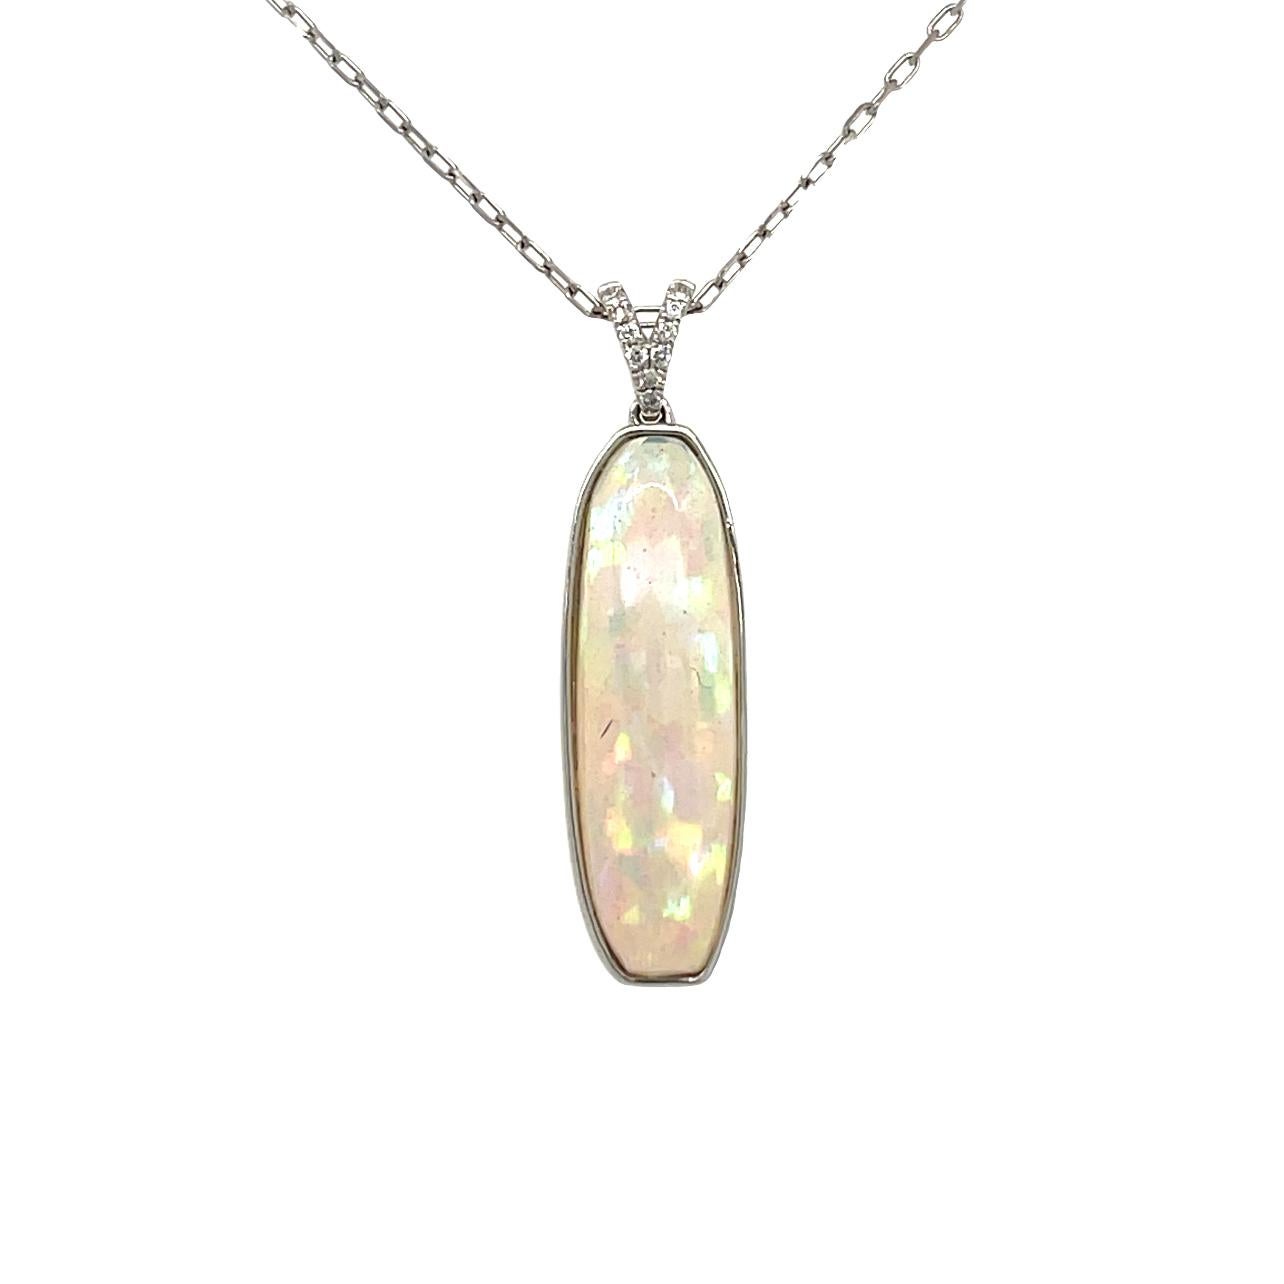 This vibrant elongated Ethiopian Opal and diamond pendant is bezel set in 14 karat white gold. There are sparkling brilliant cut diamonds on the bail for a beautiful accent. This pendant will be shipped in a beautiful box, ready for the perfect